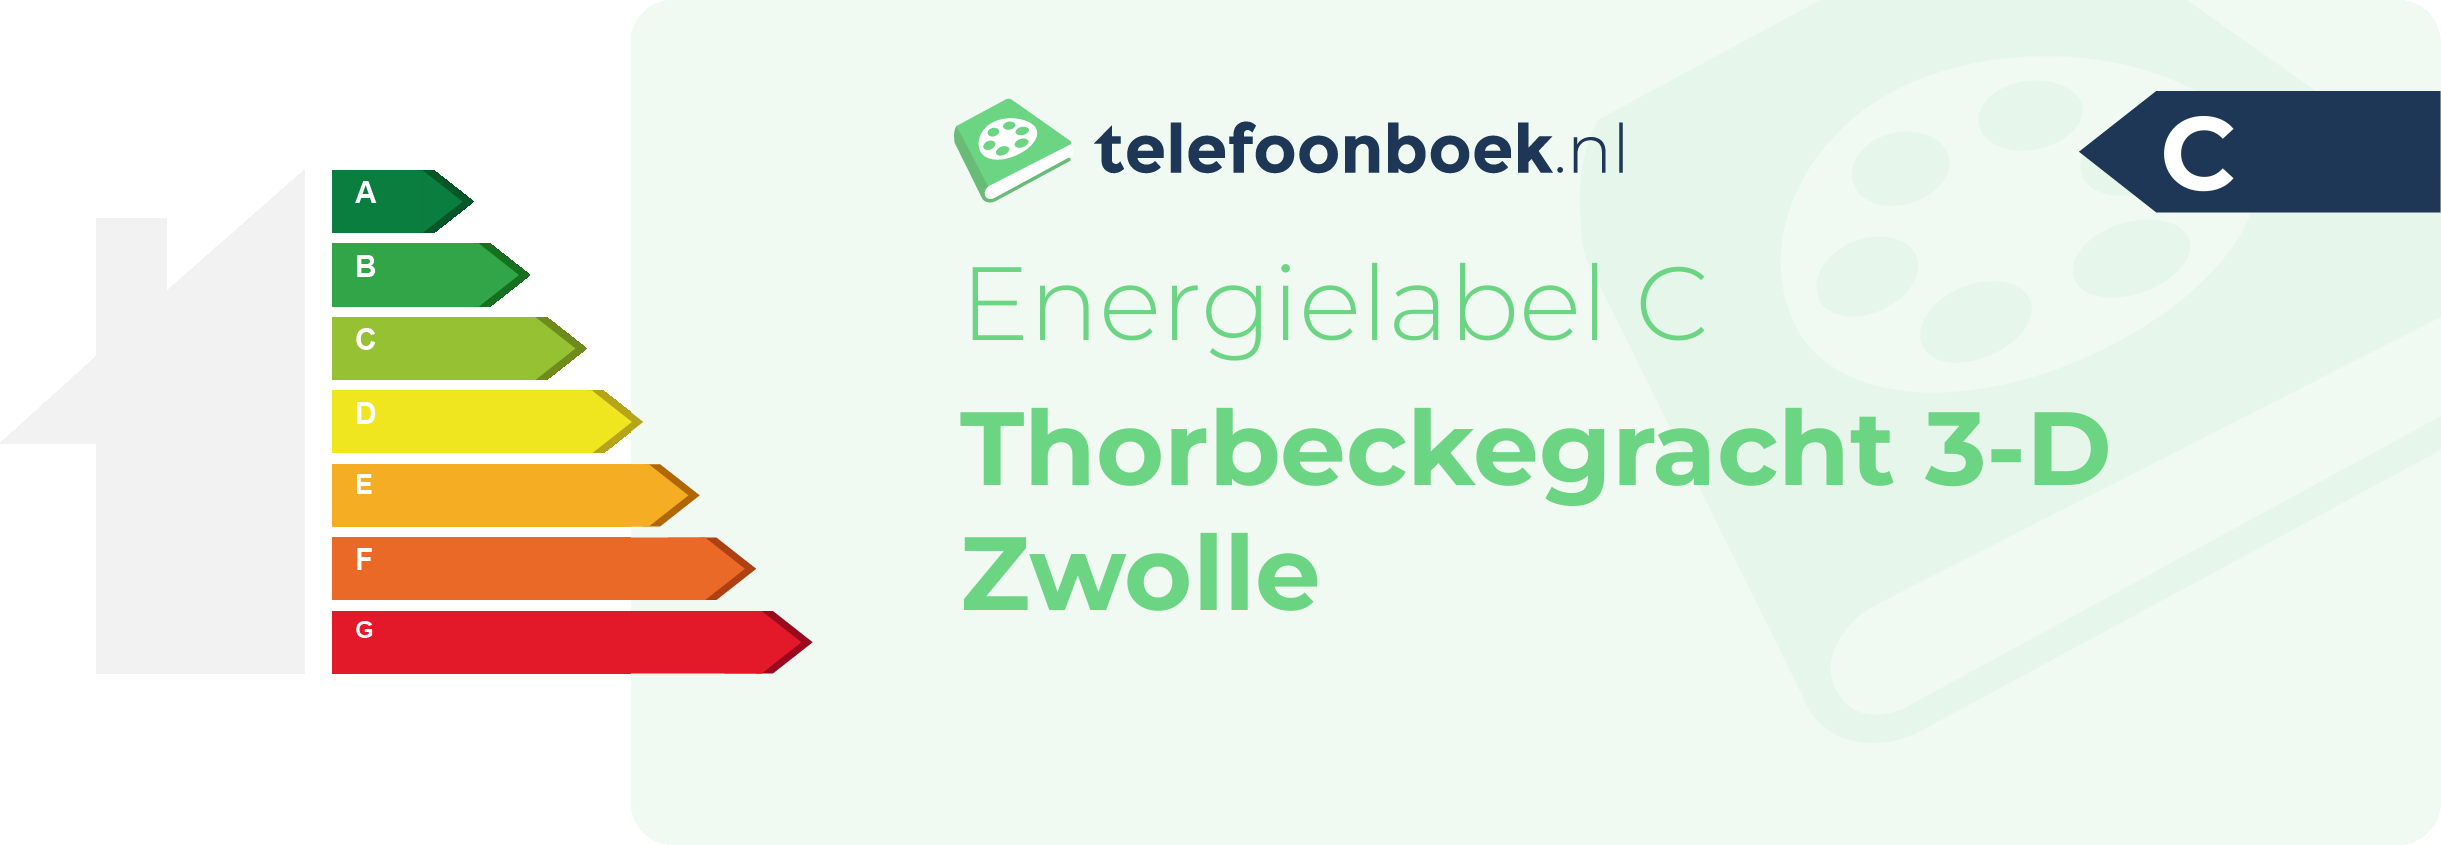 Energielabel Thorbeckegracht 3-D Zwolle